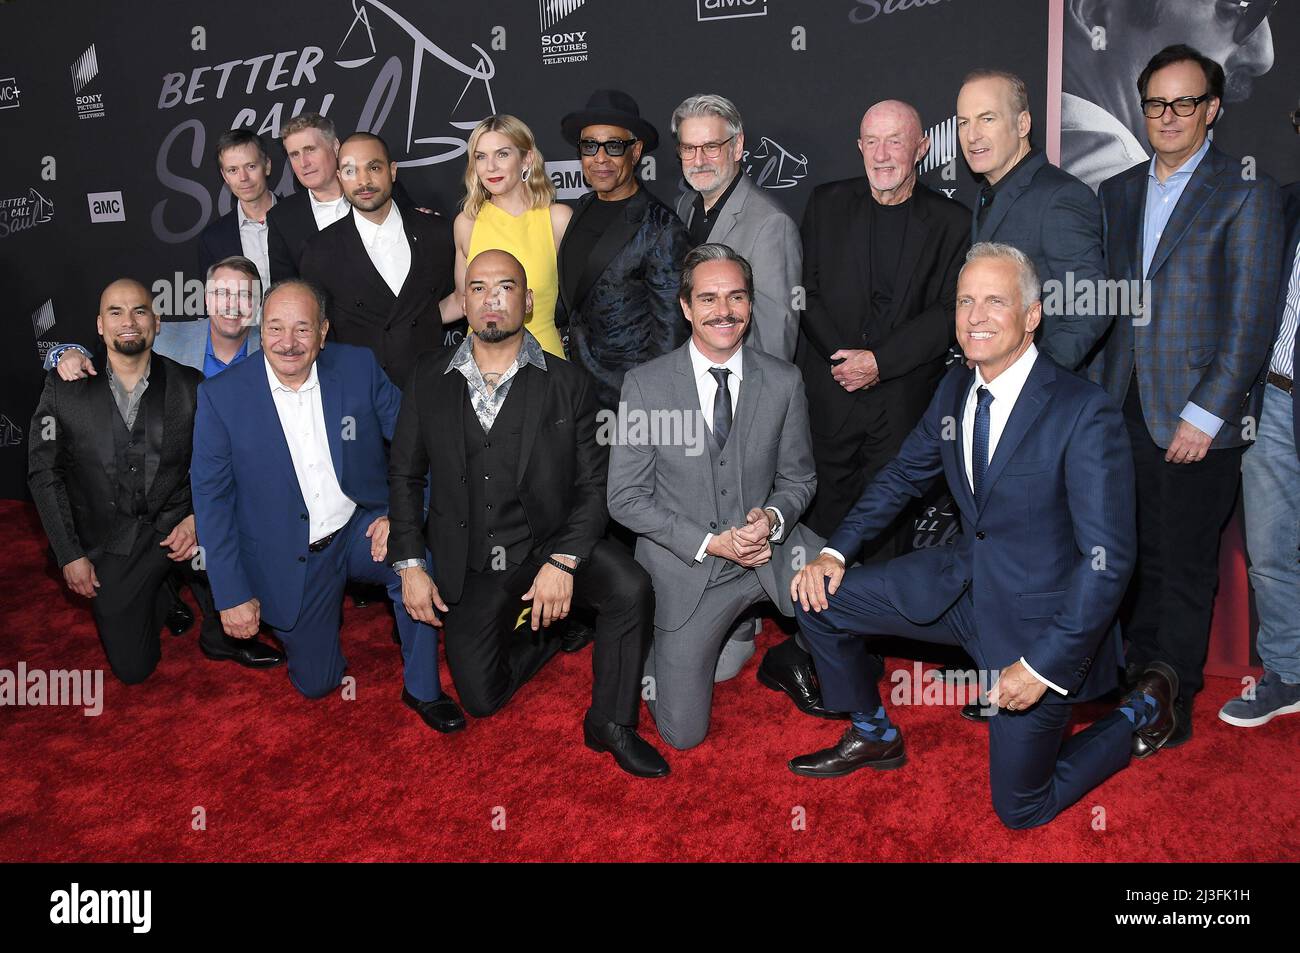 Los Angeles, USA. 07th Apr, 2022. BETTER CALL SAUL Cast & Crew at the  Premiere of AMC's BETTER CALL SAUL Sixth and Final Season held at the  Hollywood Legion Theater in Hollywood,